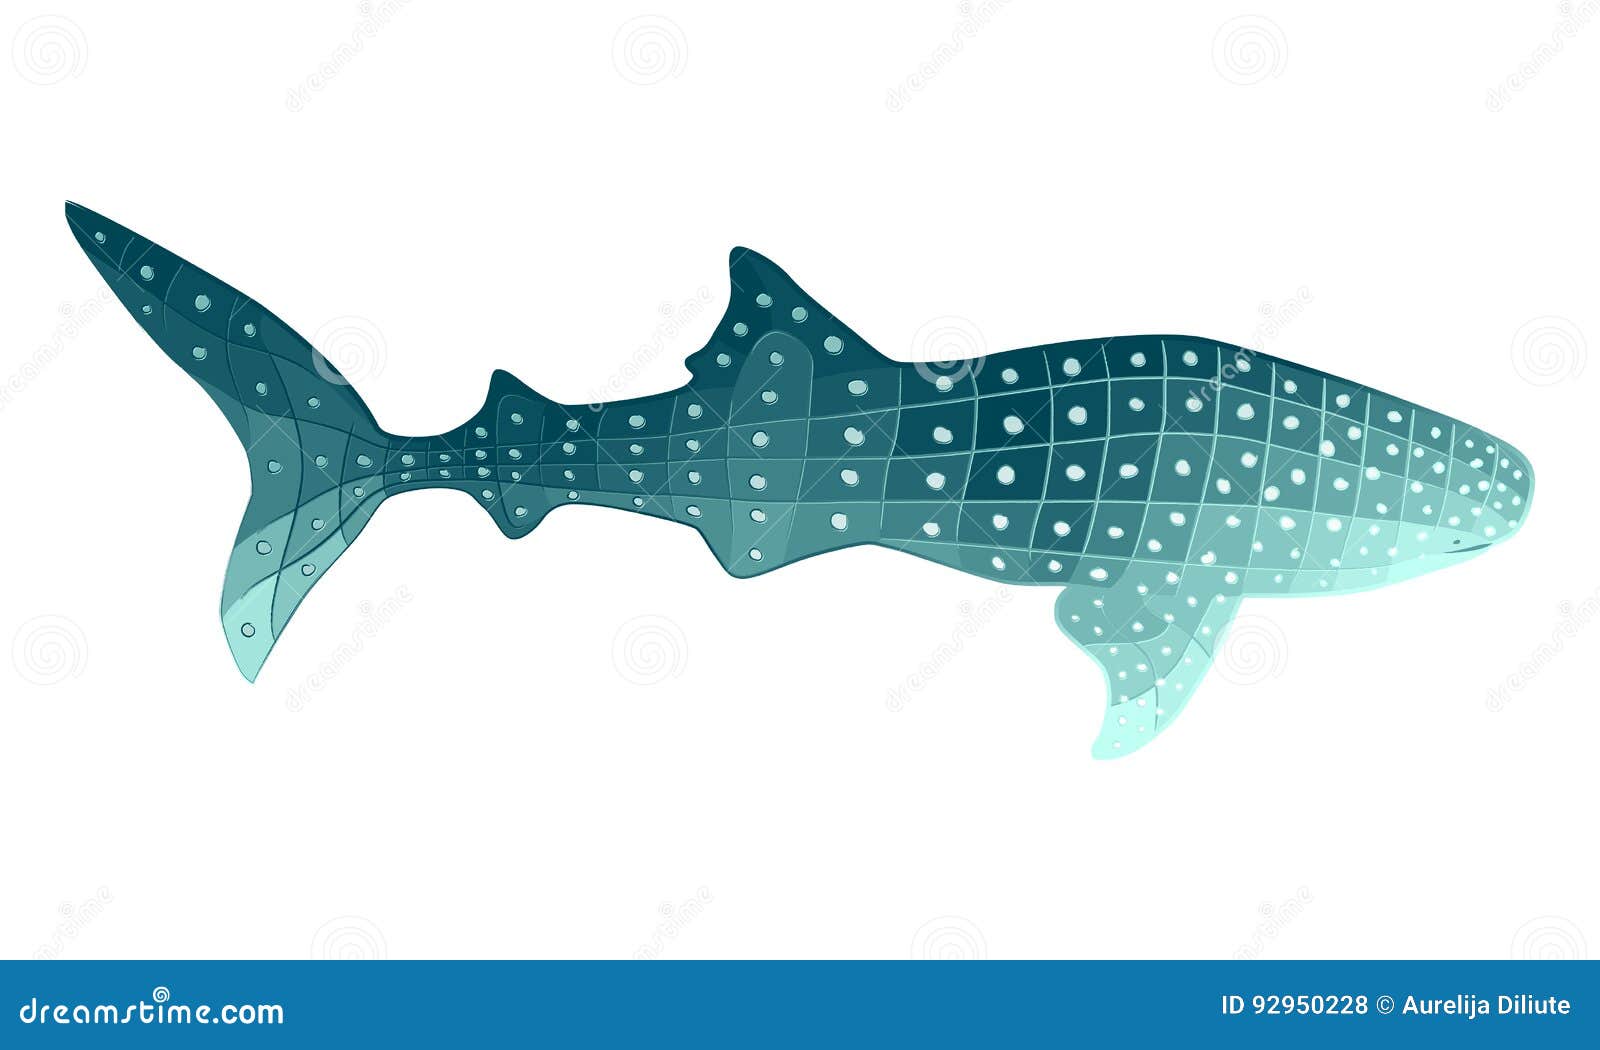 Download Whale Shark Stylized In Quadrangular Shapes And Dots Stock ...